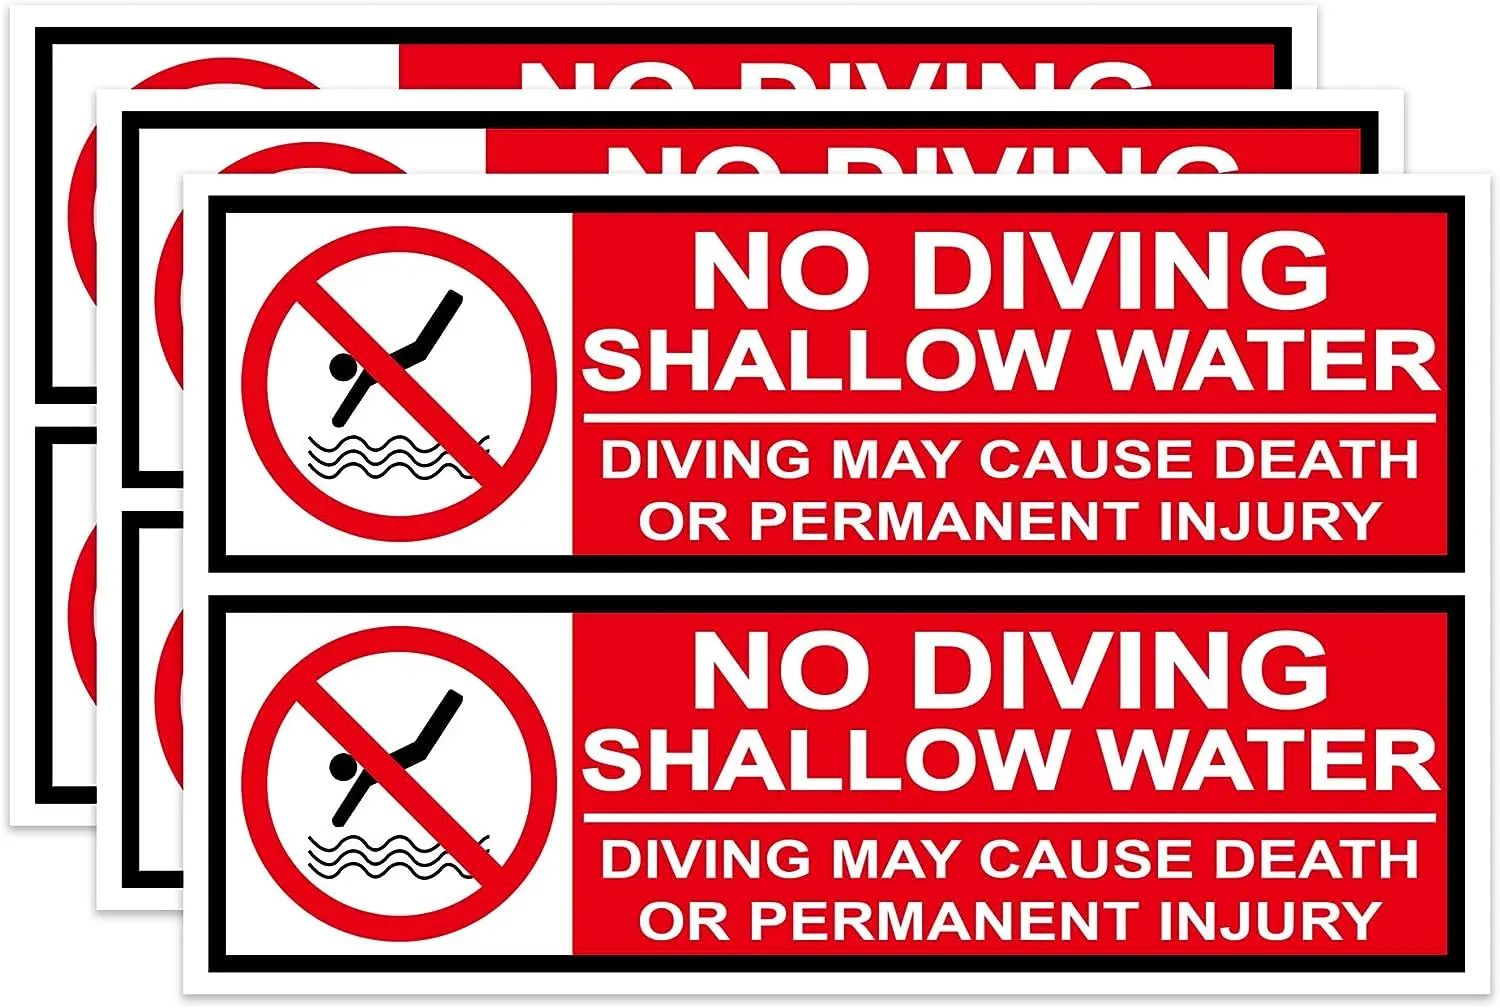 

6 Pcs No Diving Labels Shallow Water Stickers 3*10 Inches NO DIVING Adhesive Swimming Pool Safety Warning Caution Stickers